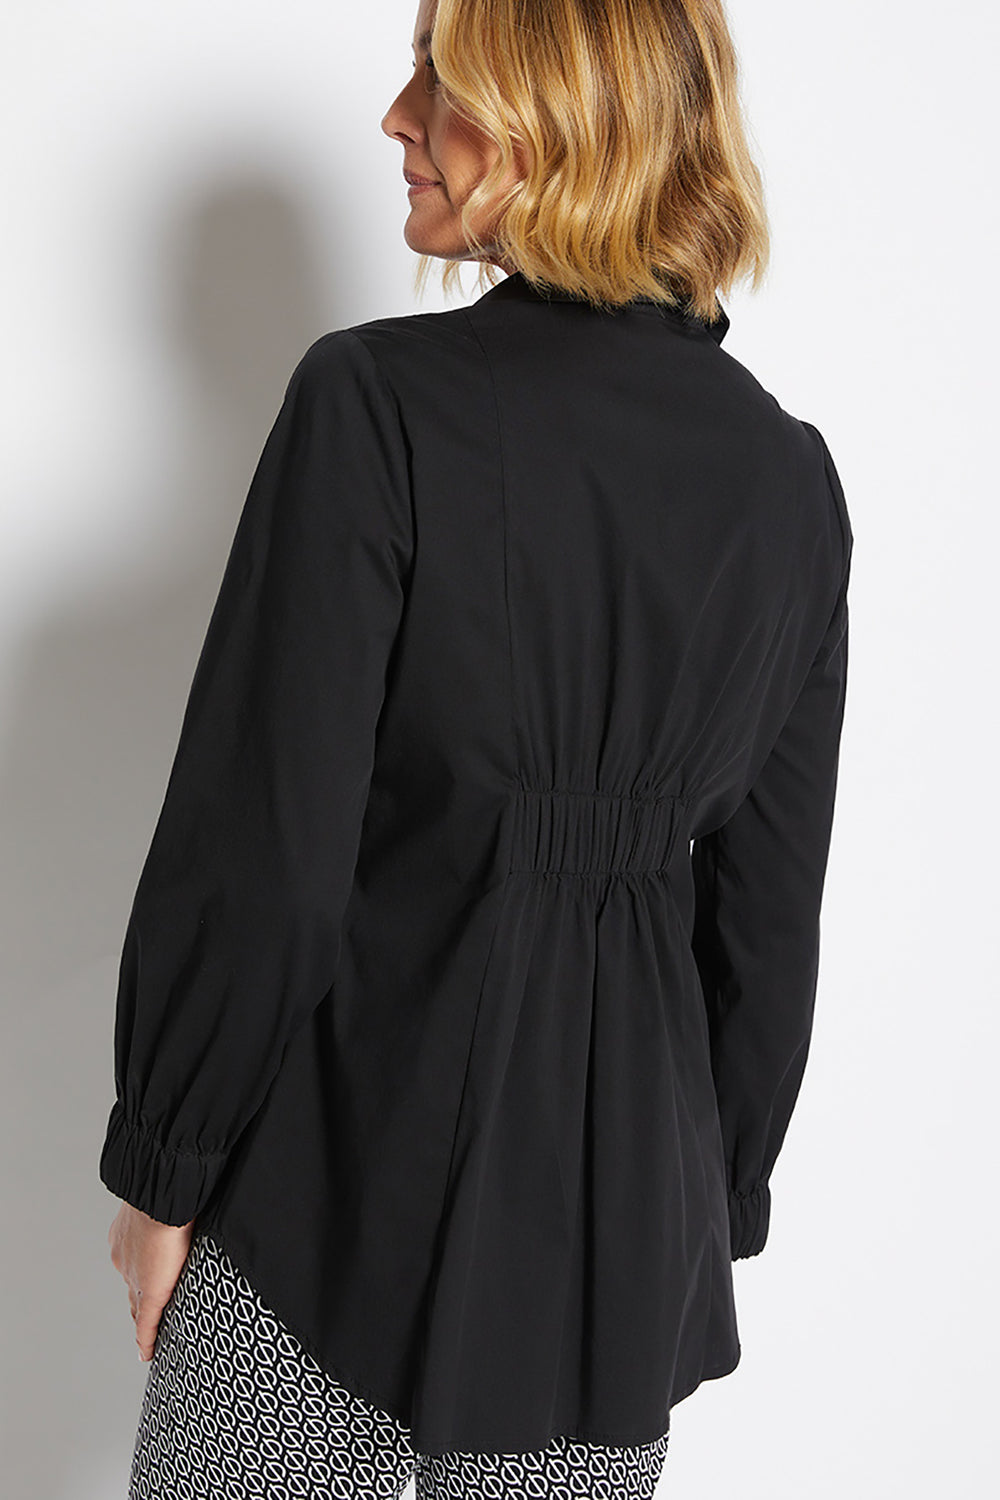 natalie shirt in black by philosophy back view